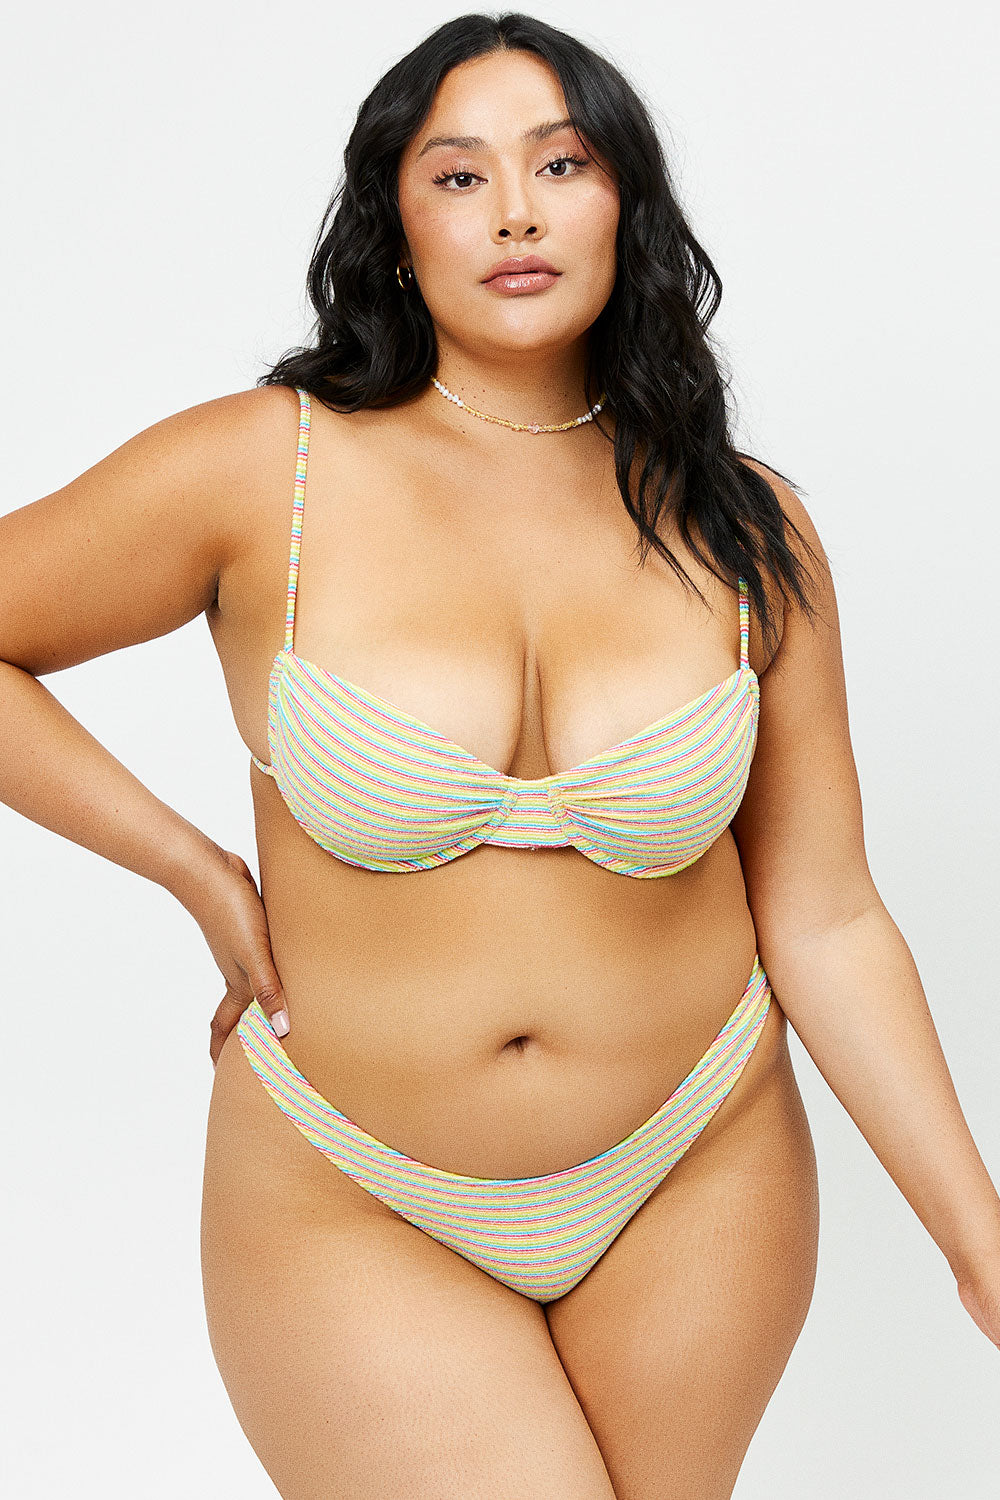 Cosmo Underwire Top & Slide Thong Bottom Bikini (Plus Sizes Available)